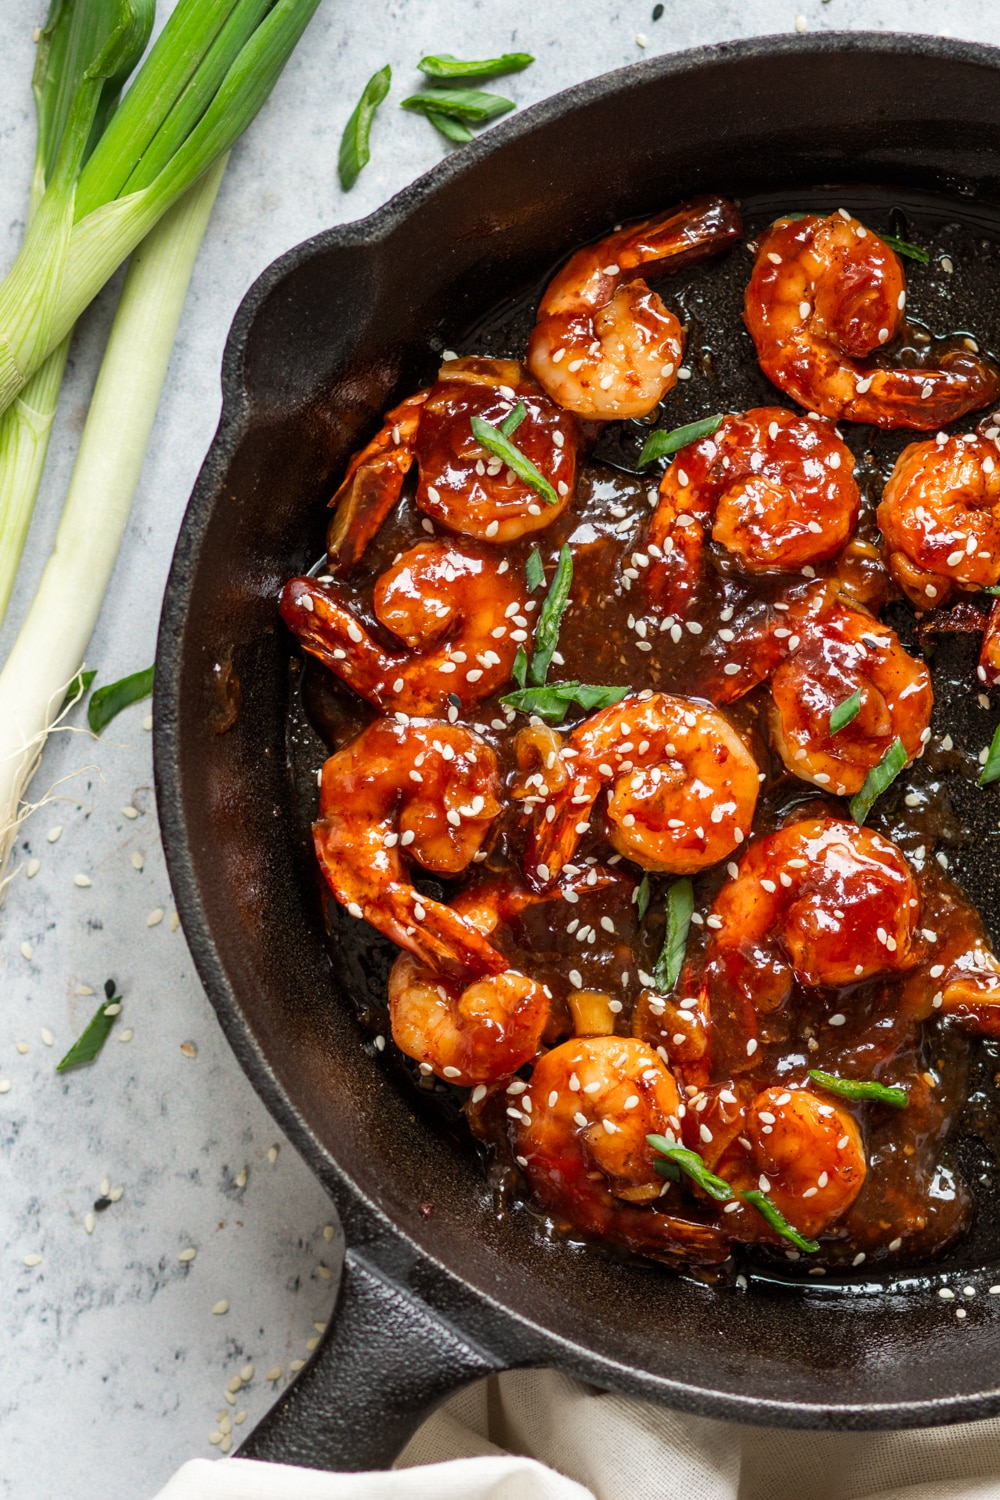 An overhead view of several pieces of shrimp covered in a sweet and sour sauce in a skillet. There are sesame seeds and sliced green onion on top of the shrimp. A few stalks of green onion are to the left of the skillet and everything is on a white counter.